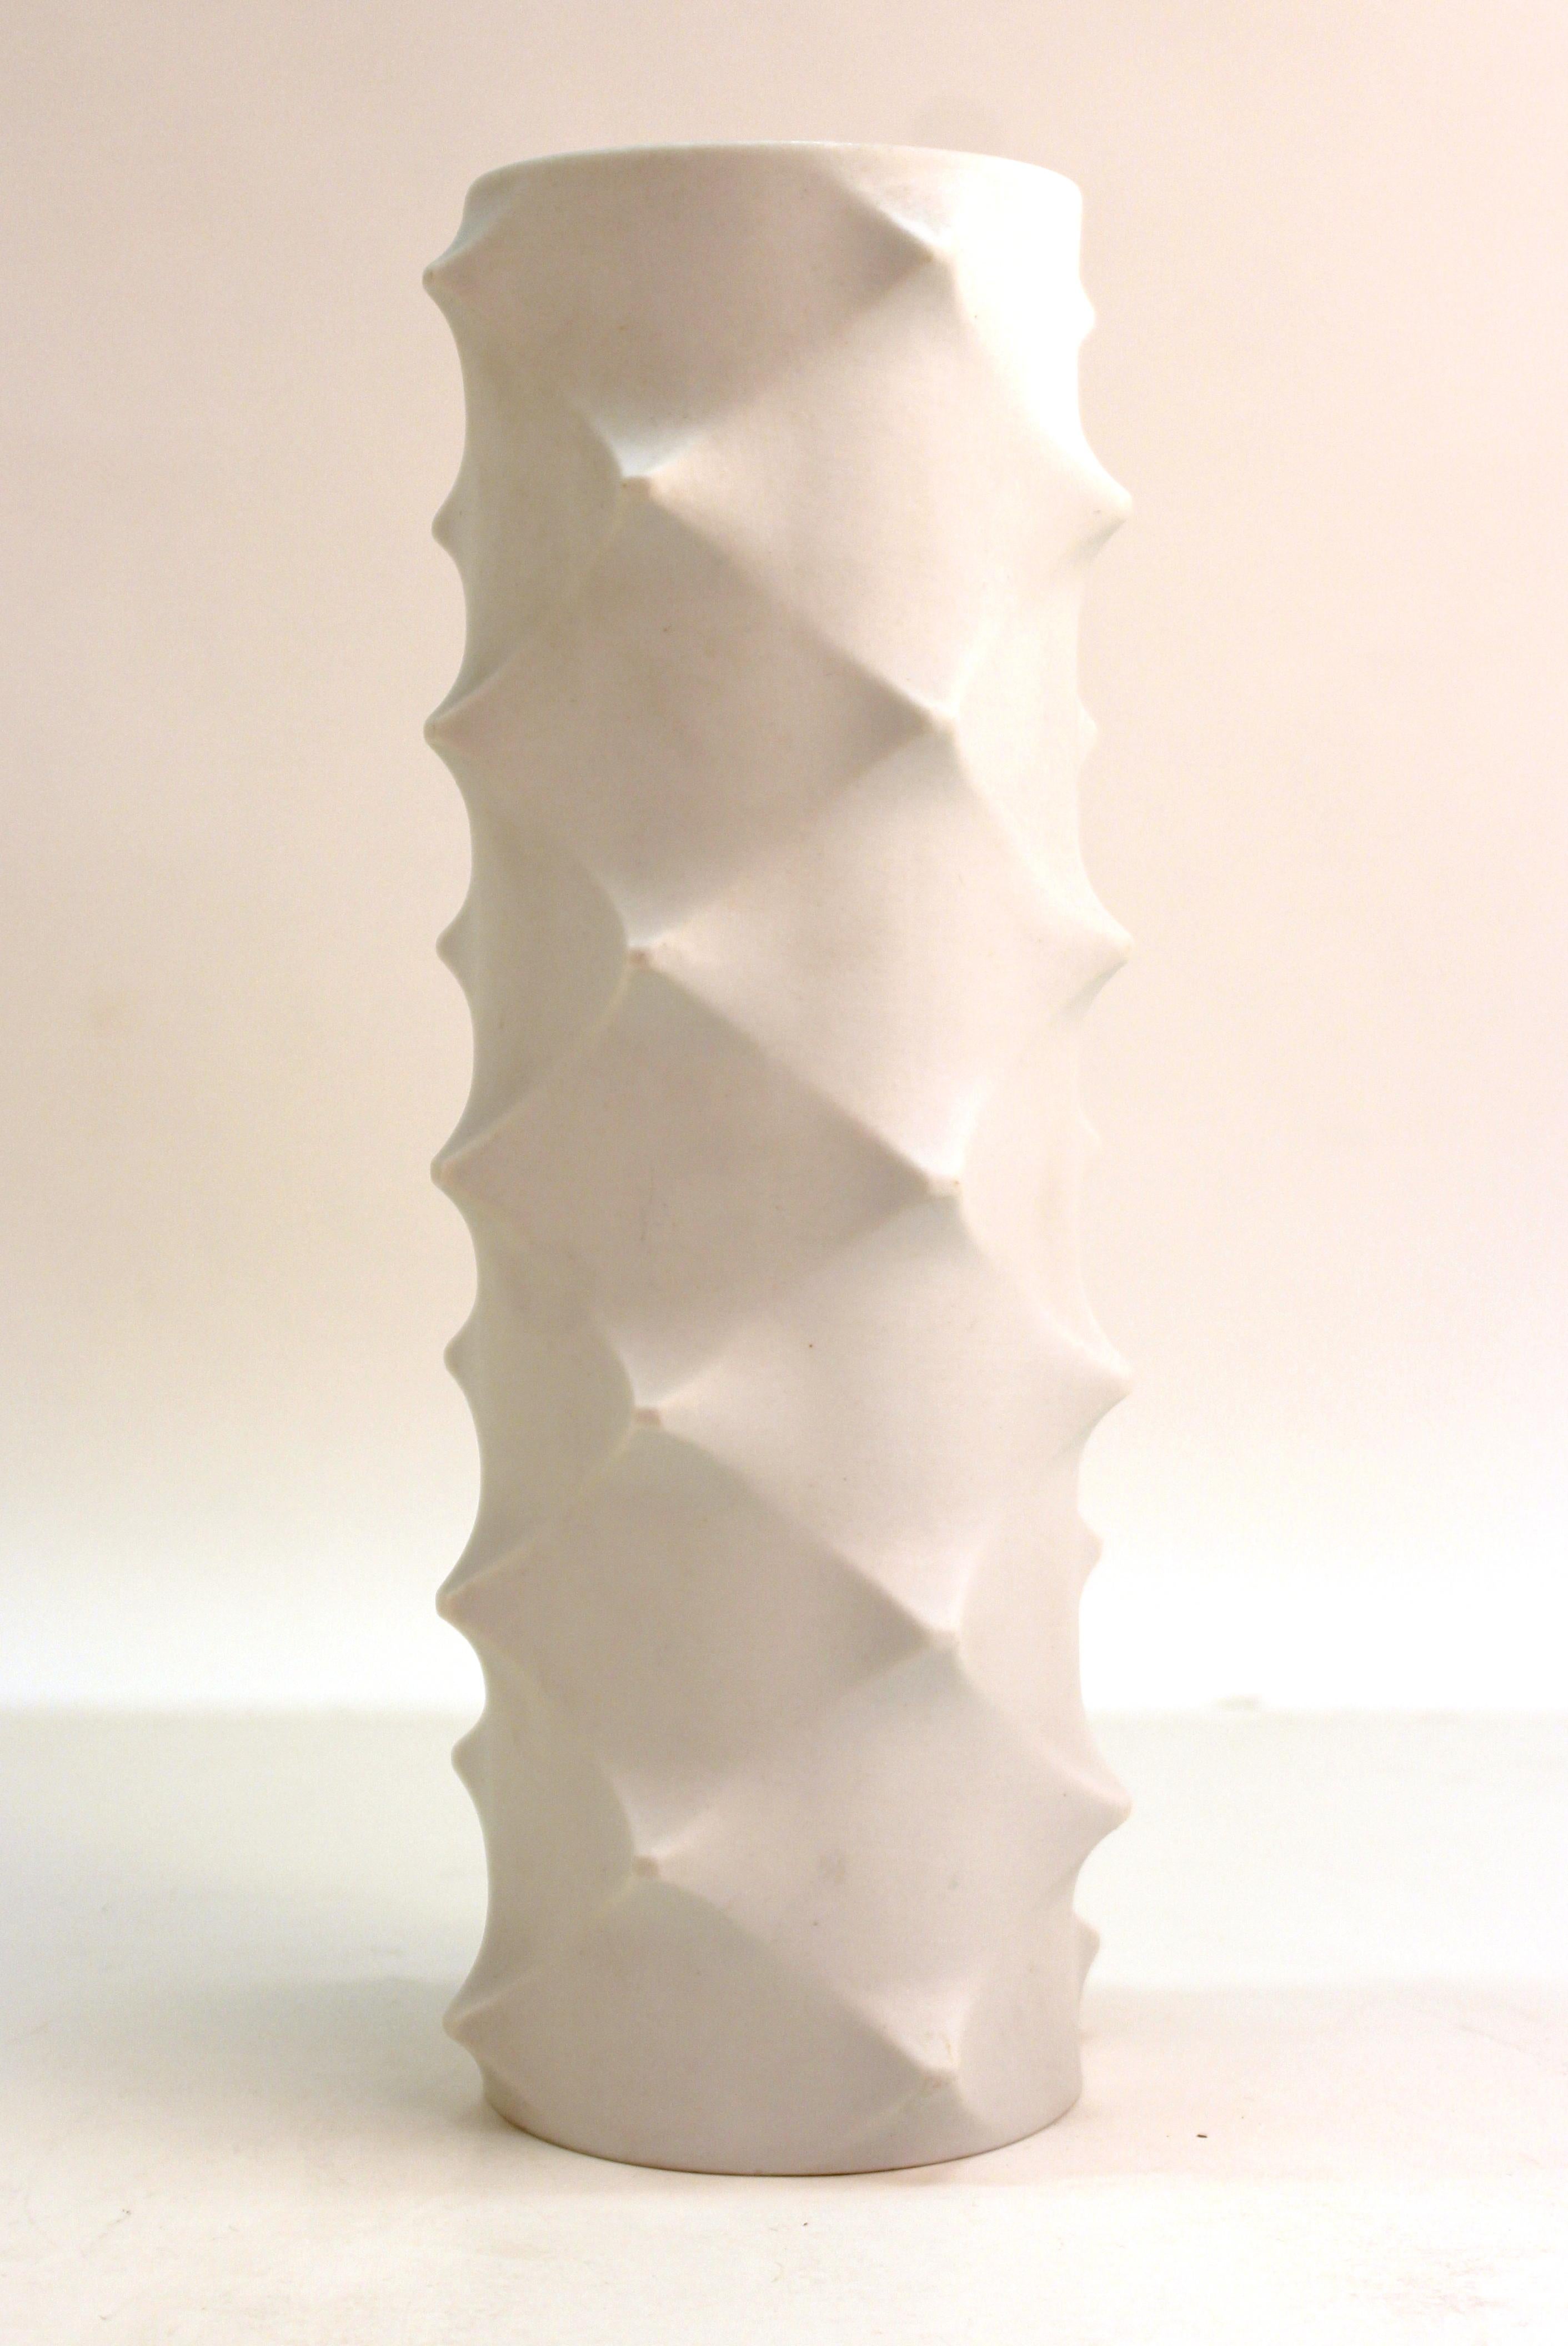 Bavarian midcentury Scherzer white porcelain Op Art vase with biomorphic surface. The piece is in great vintage condition with age-appropriate wear to the base.